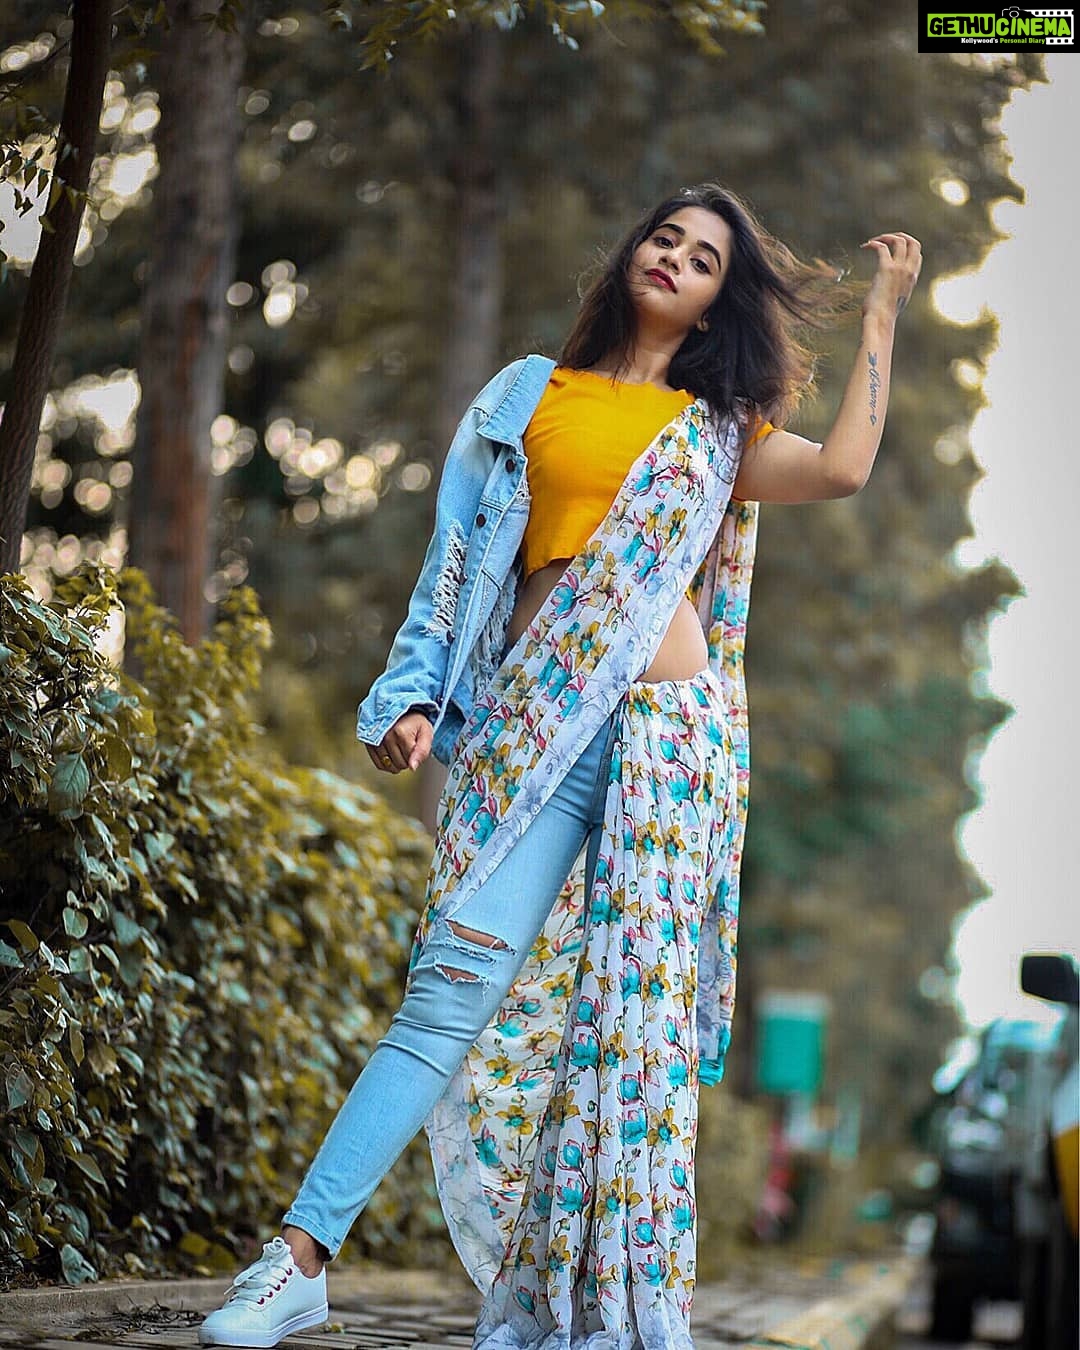 Deepthi Sunaina Instagram - Ditching the conventional style by giving a fun & modern spin to the traditional look by pairing saree with jeans, crop top & completing it with sneakers & a flashy denim jacket. Wear this to your best friend's sangeet to take on the contemparory vibe & go all out on the dance floor stress-free. Let me know what occasion would you prefer this look. Also, don't forget to check out @myntra fashionotasav collection to try out more options on my look. HURRY! Valid only until 15th of OCT - LINK In BIO. #MyntraFashionotsav #Myntra #LightUp #FestiveShopping #FestiveStyles . . . #galleri5InfluenStar PC: @mark_man_